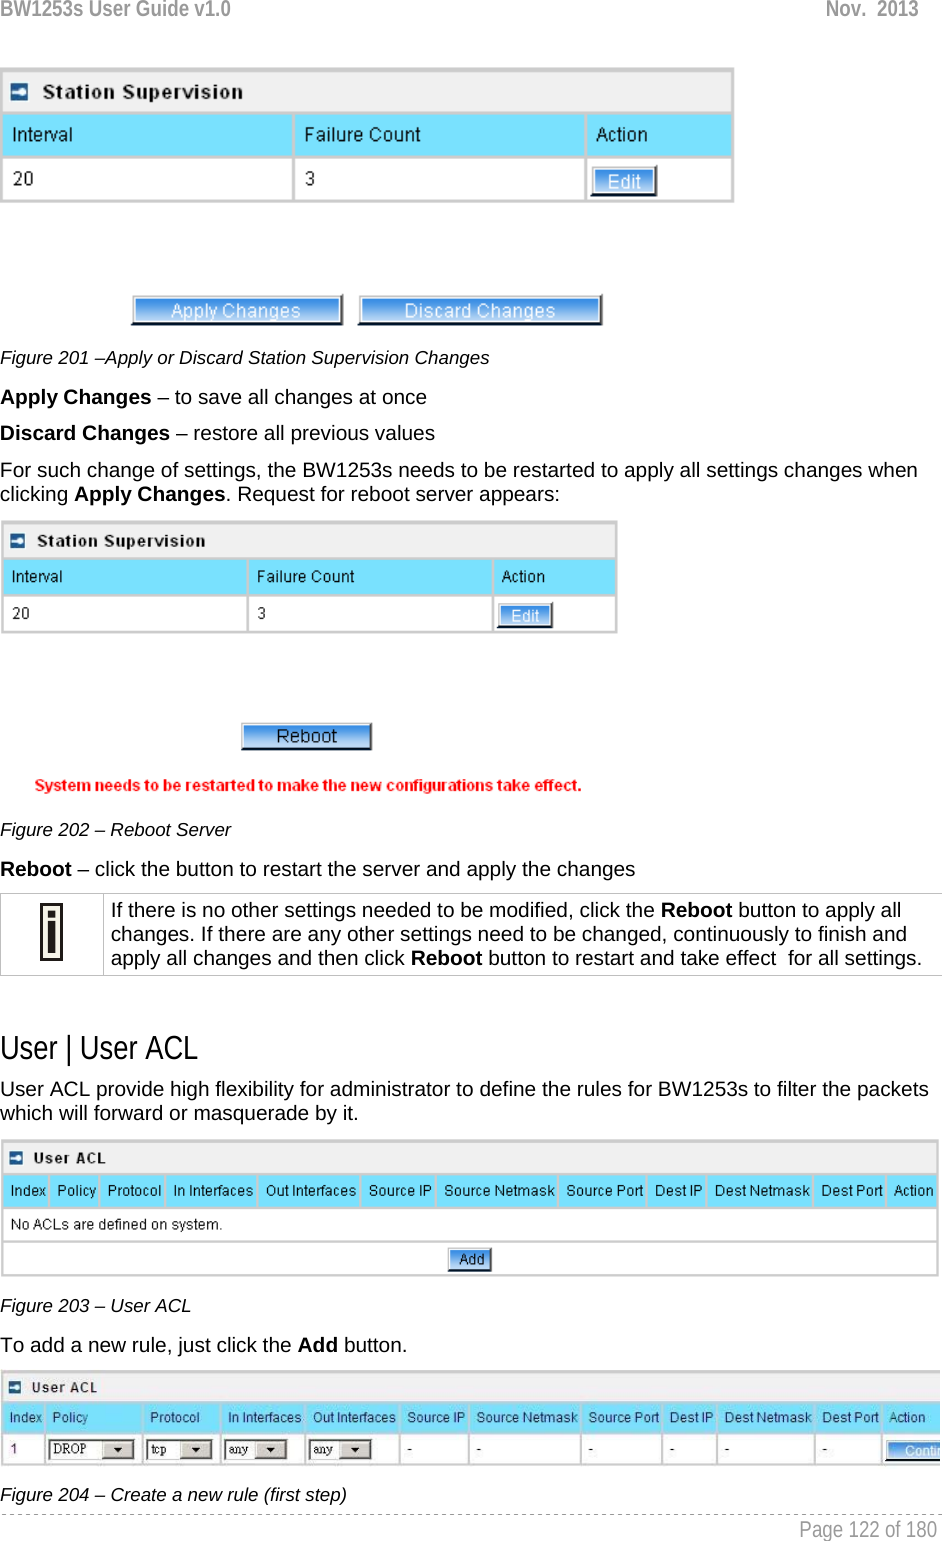 BW1253s User Guide v1.0  Nov.  2013     Page 122 of 180    Figure 201 –Apply or Discard Station Supervision Changes Apply Changes – to save all changes at once Discard Changes – restore all previous values For such change of settings, the BW1253s needs to be restarted to apply all settings changes when clicking Apply Changes. Request for reboot server appears:  Figure 202 – Reboot Server Reboot – click the button to restart the server and apply the changes  If there is no other settings needed to be modified, click the Reboot button to apply all changes. If there are any other settings need to be changed, continuously to finish and apply all changes and then click Reboot button to restart and take effect  for all settings.  User | User ACL User ACL provide high flexibility for administrator to define the rules for BW1253s to filter the packets which will forward or masquerade by it.  Figure 203 – User ACL To add a new rule, just click the Add button.  Figure 204 – Create a new rule (first step) 